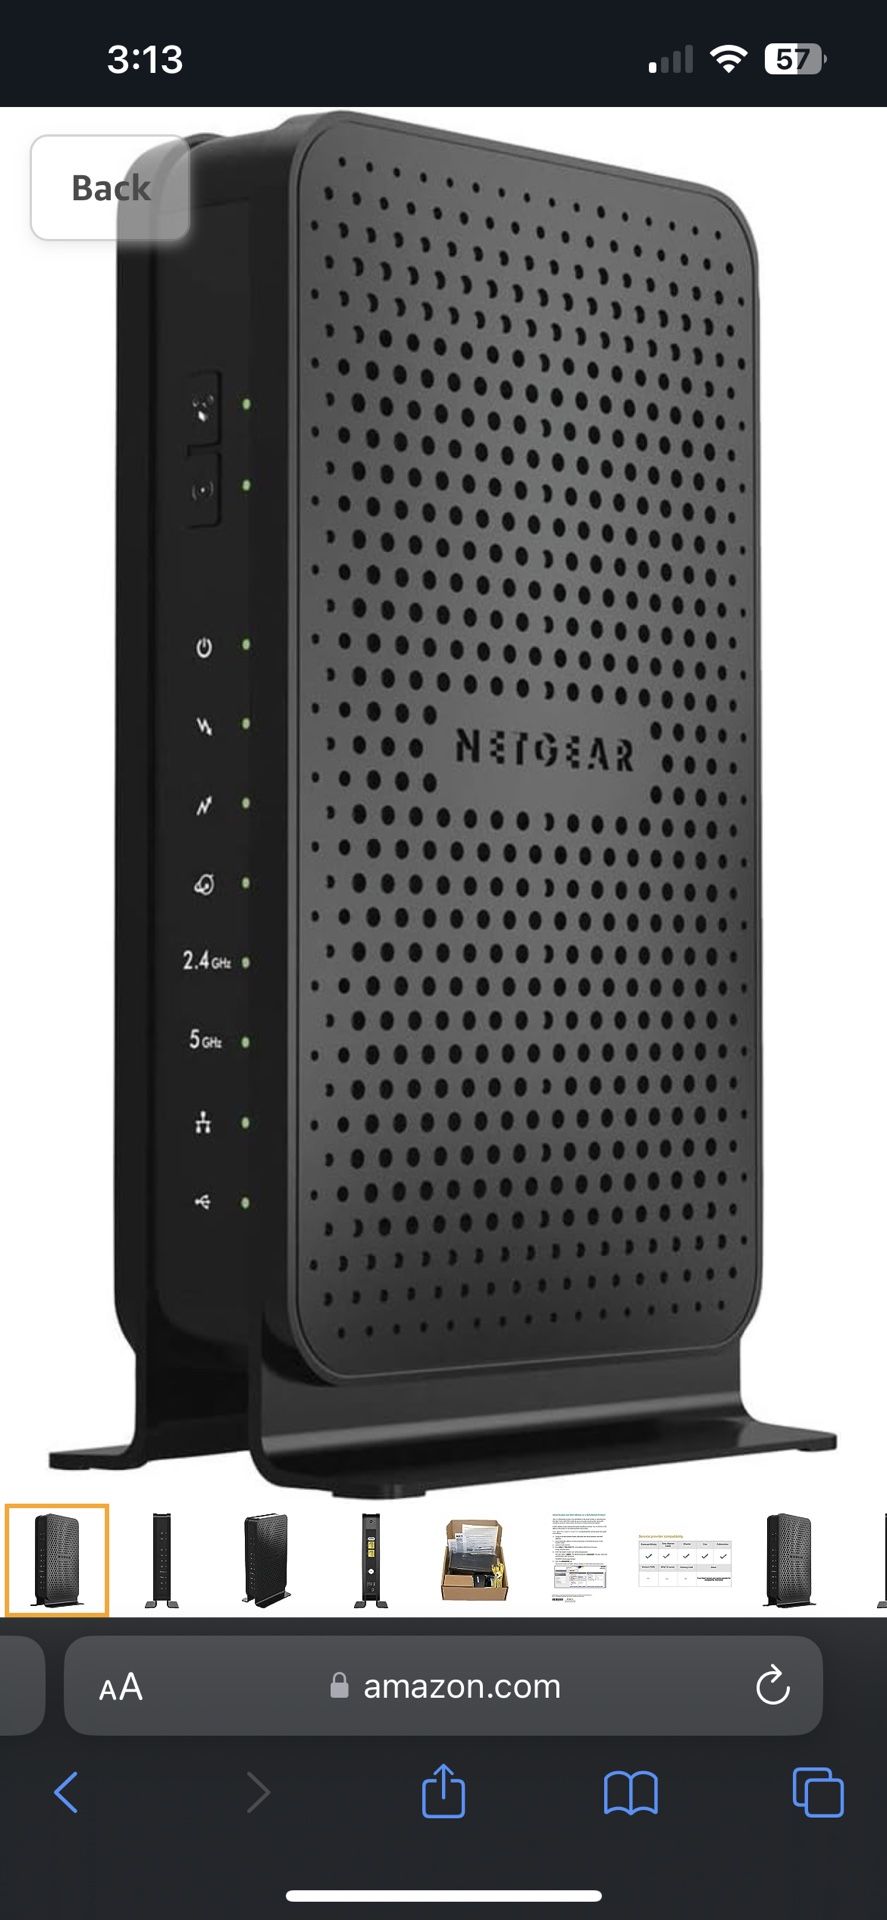 Netgear C3700-100NAR C3700-NAR DOCSIS 3.0 WiFi Cable Modem Router for Xfinity from Comcast, Spectrum, Cox, Cablevision 